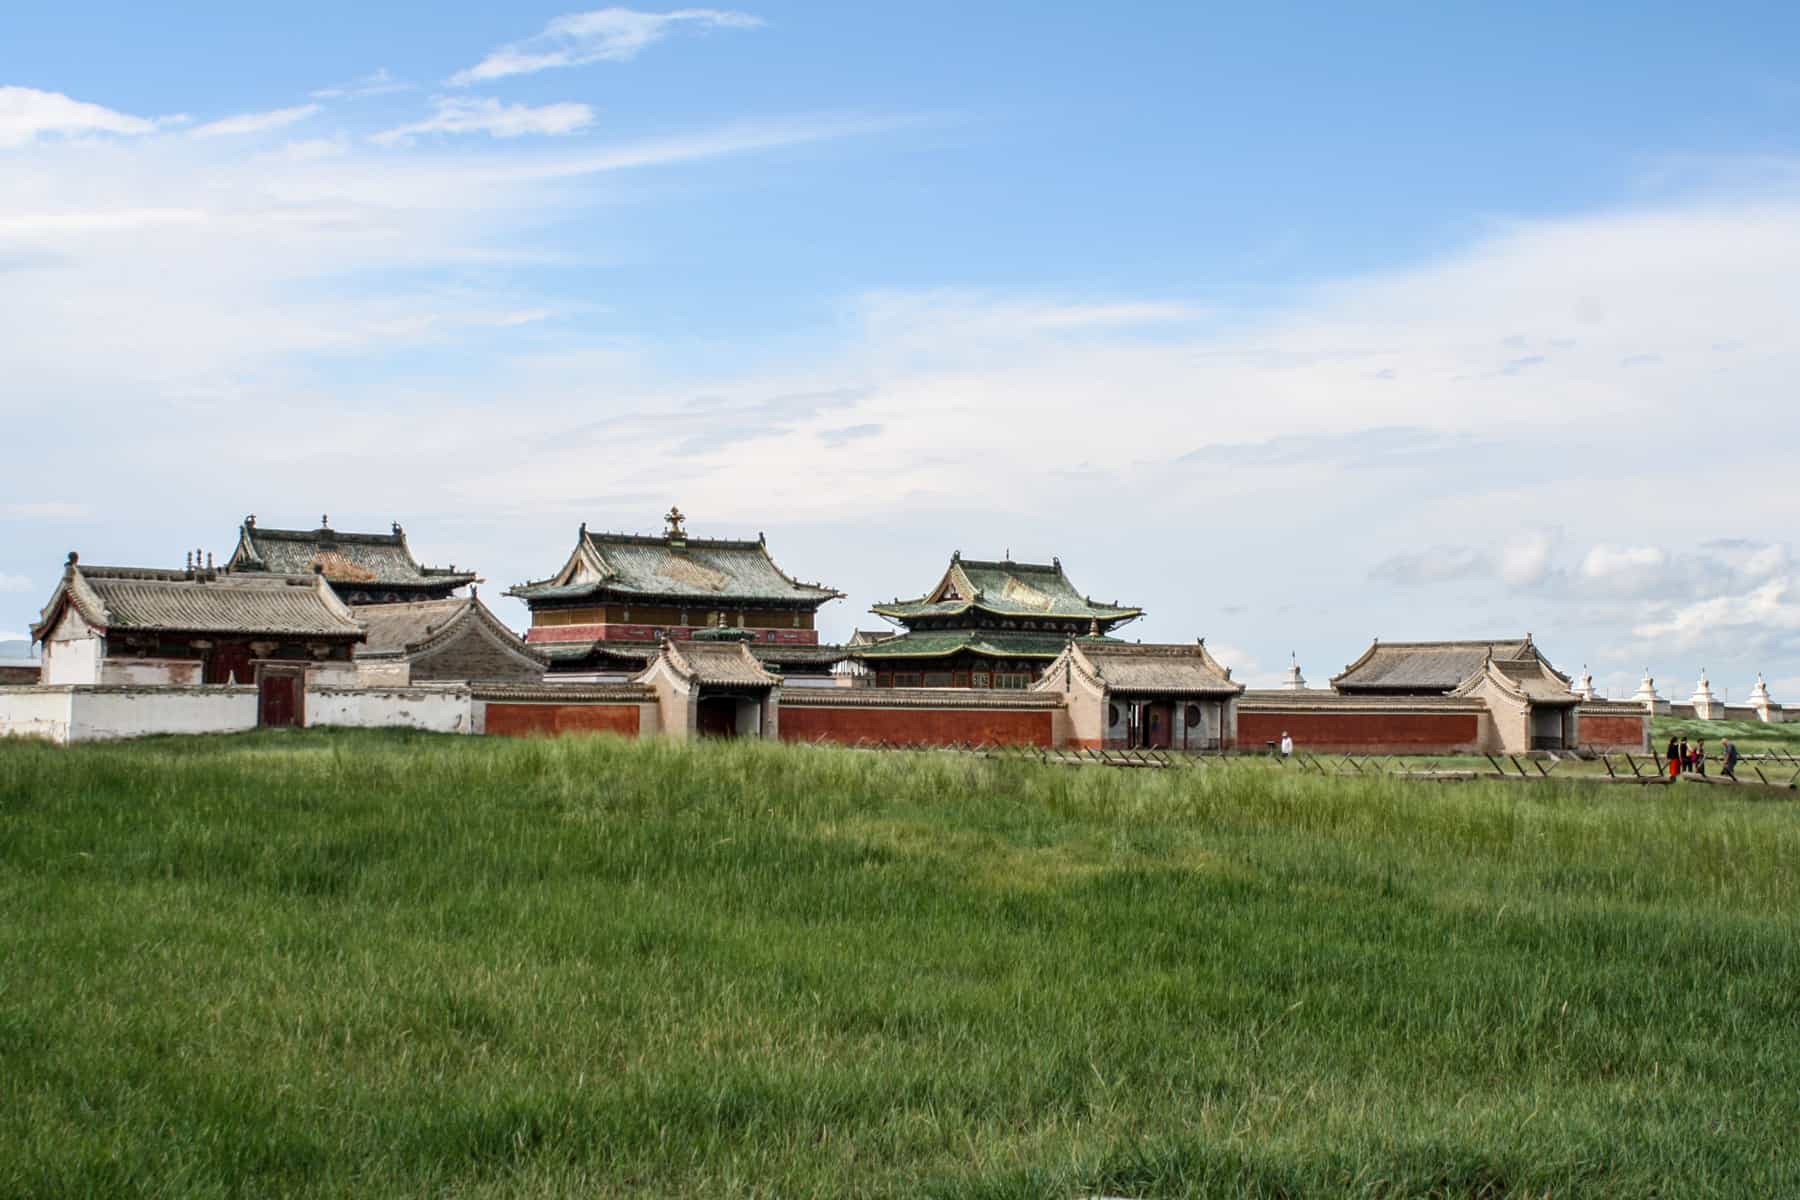 Layers roofed temple structures in a row line the wall of the exterior of the Erdene Zuu Monastery Mongolia